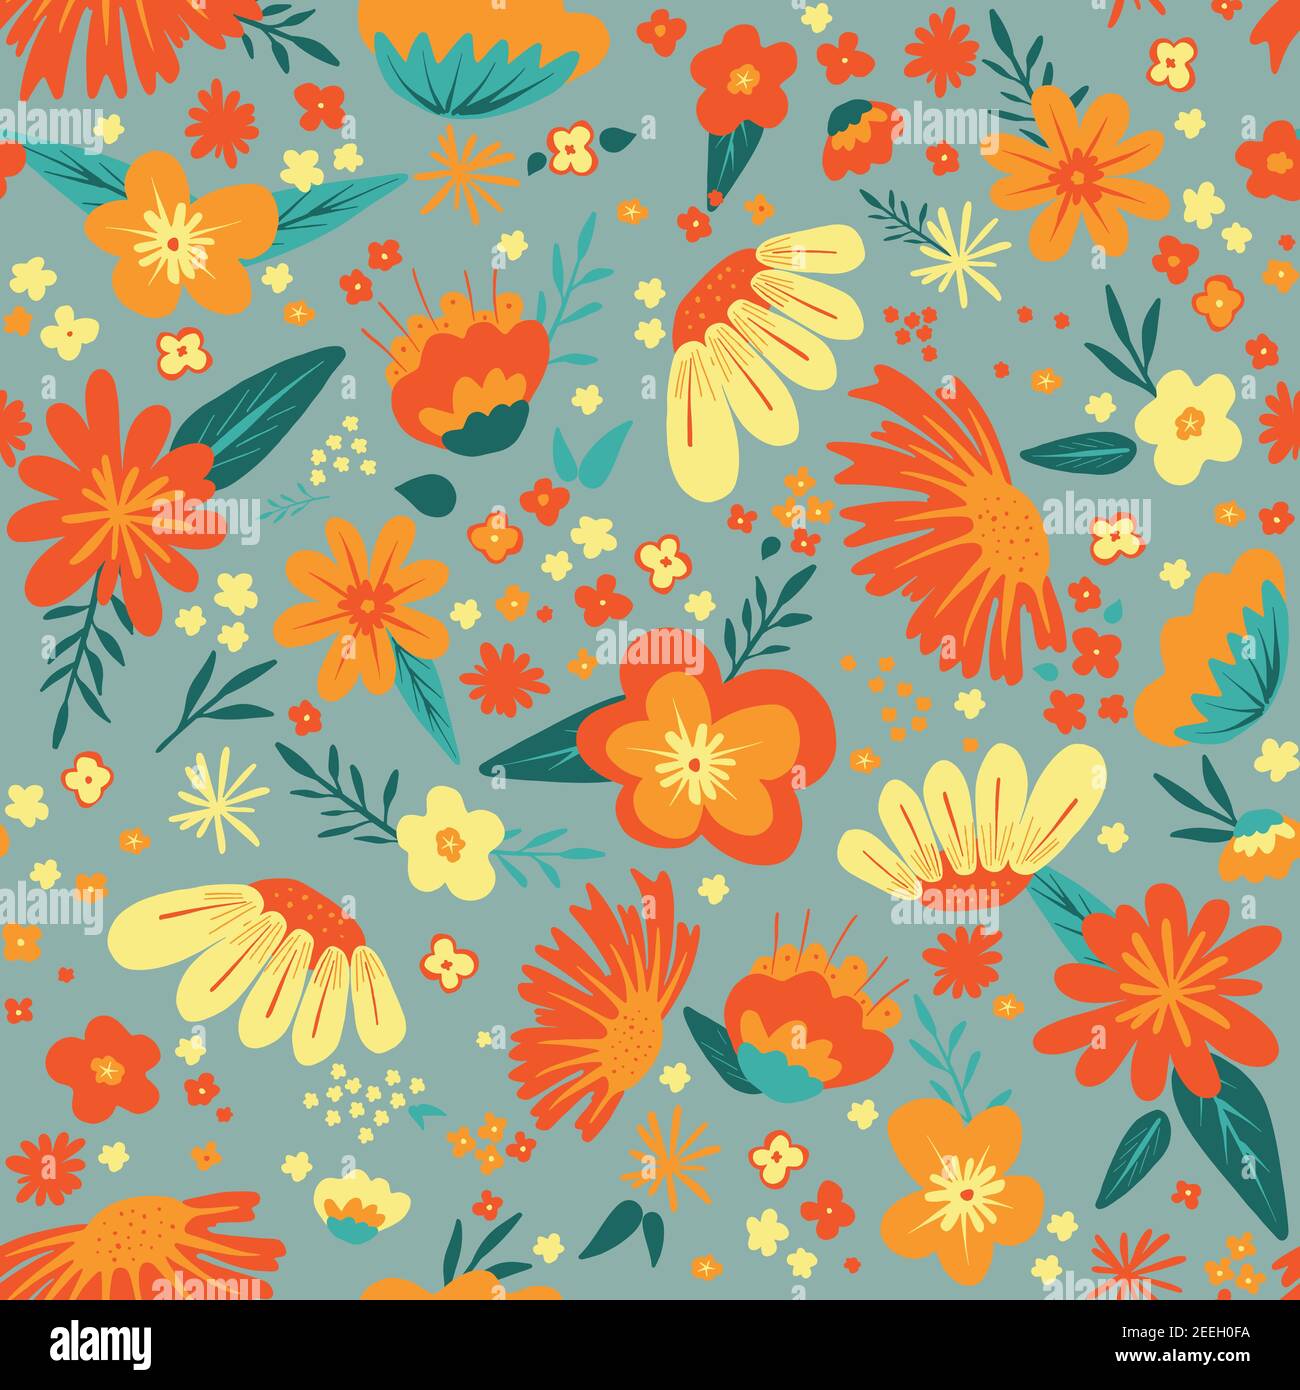 Seamless repeat vector pattern with flowers and leaves inmixed colors on grey background. Hand drawn fabric, gift wrap, wall art design. Stock Vector